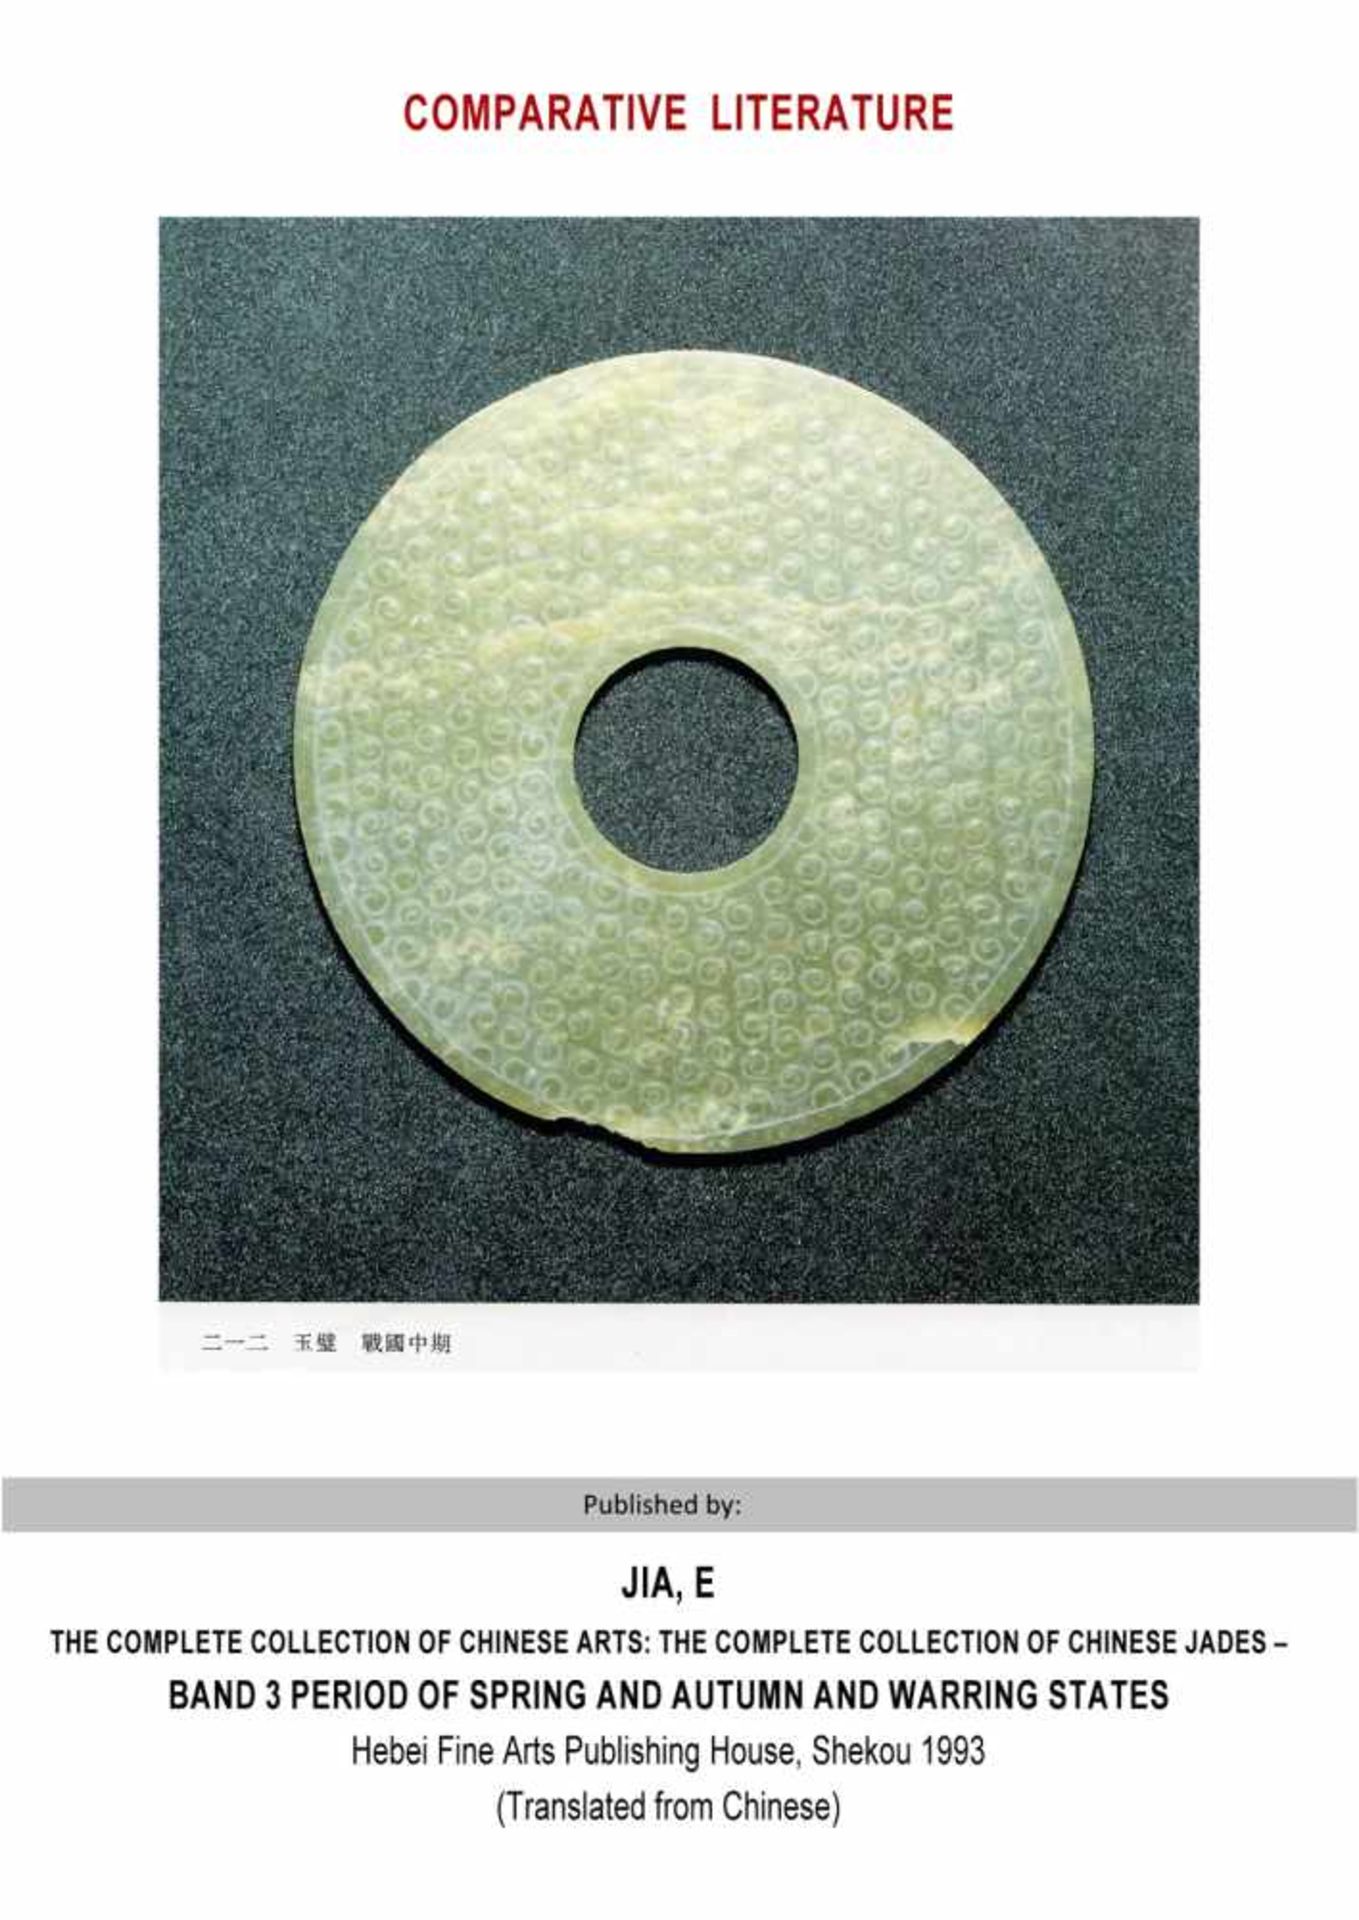 A REFINED CHARCOAL GREY DISC WITH ENGRAVED CURLS Jade. China, Han Dynasty, 2nd century BC 穀紋玉璧 - 漢代, - Image 7 of 8